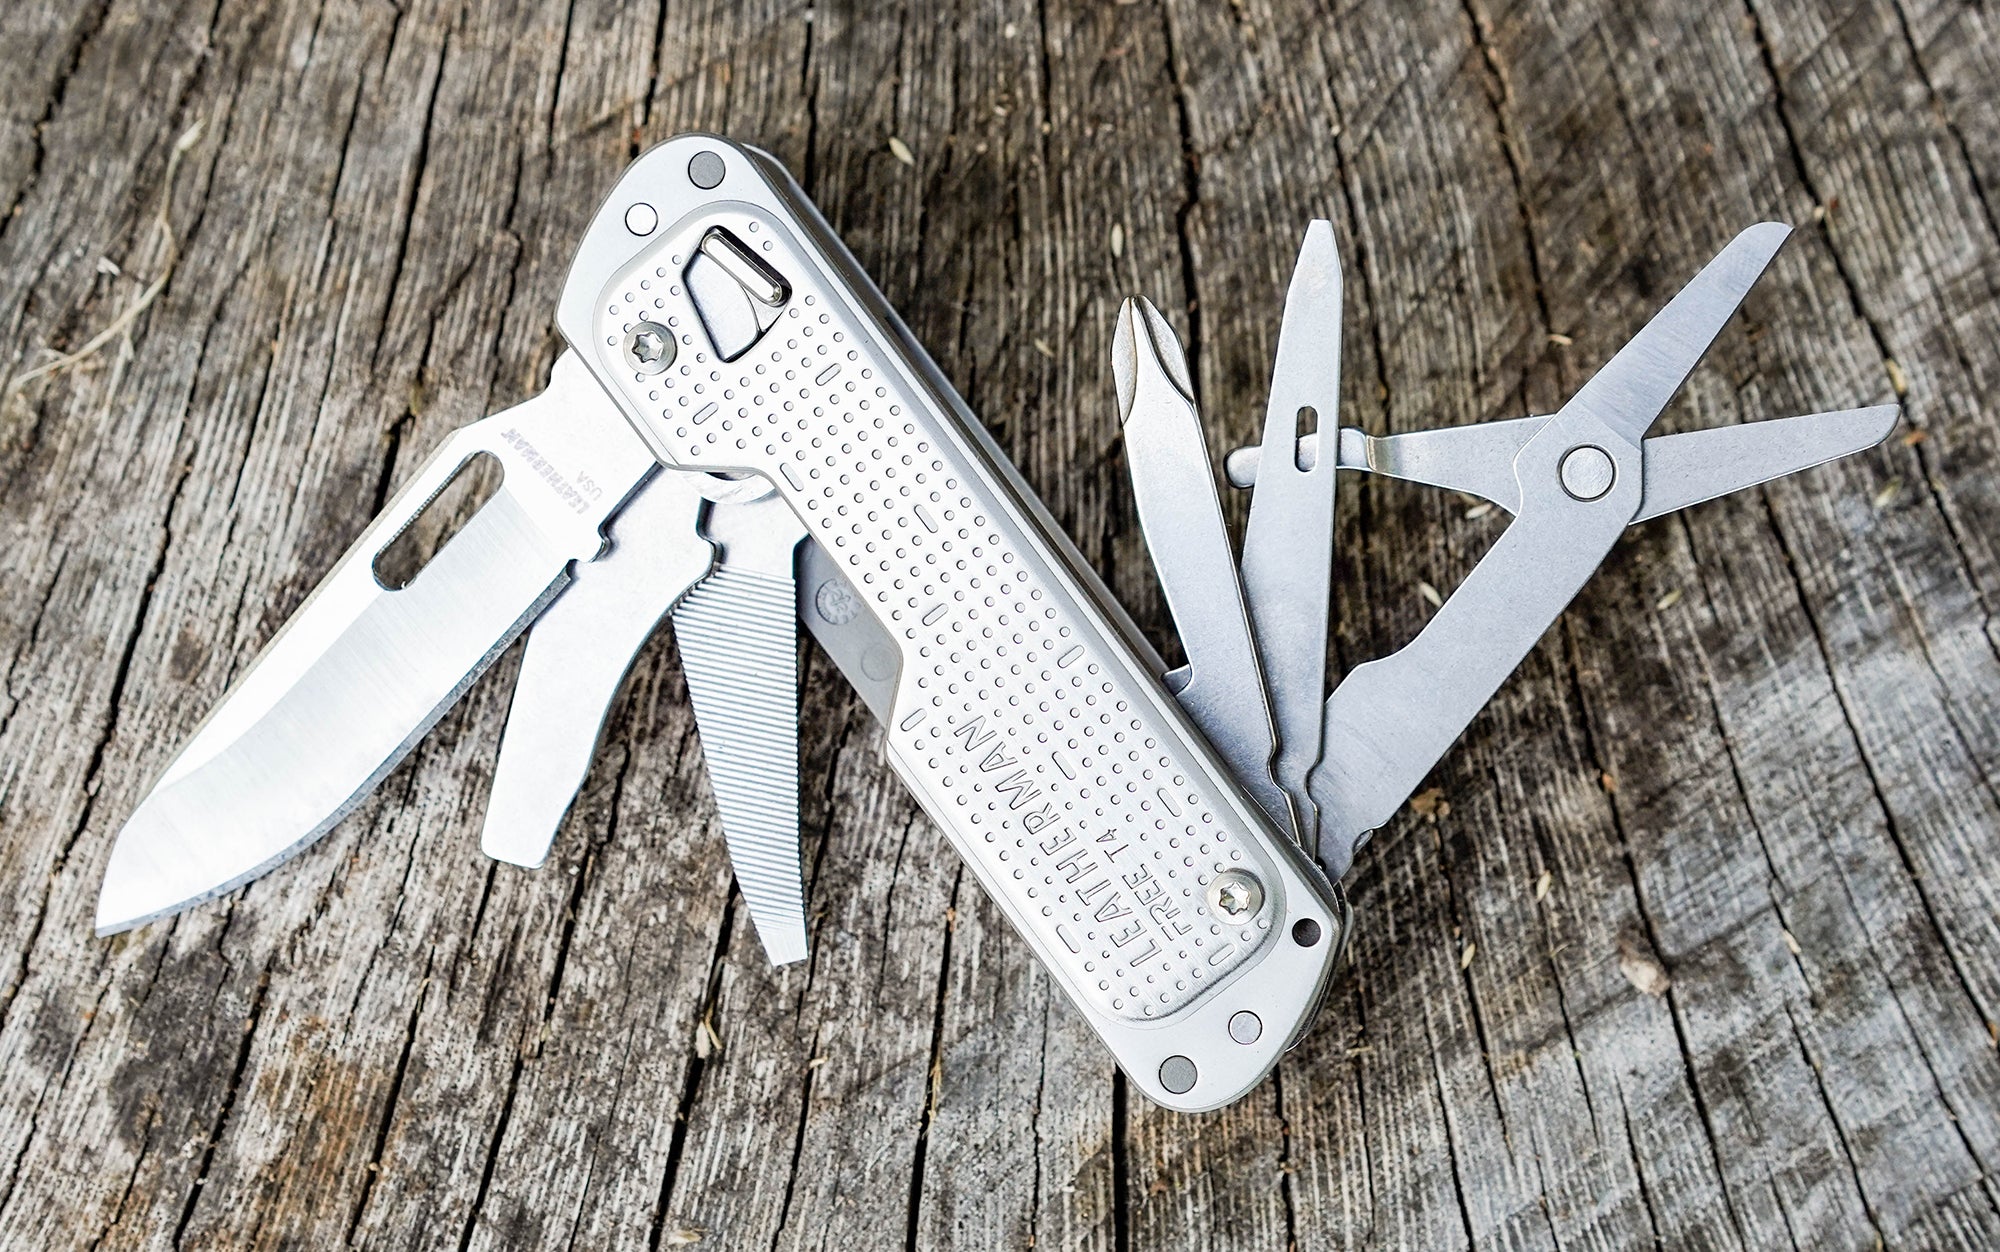 We tested the Leatherman T4.